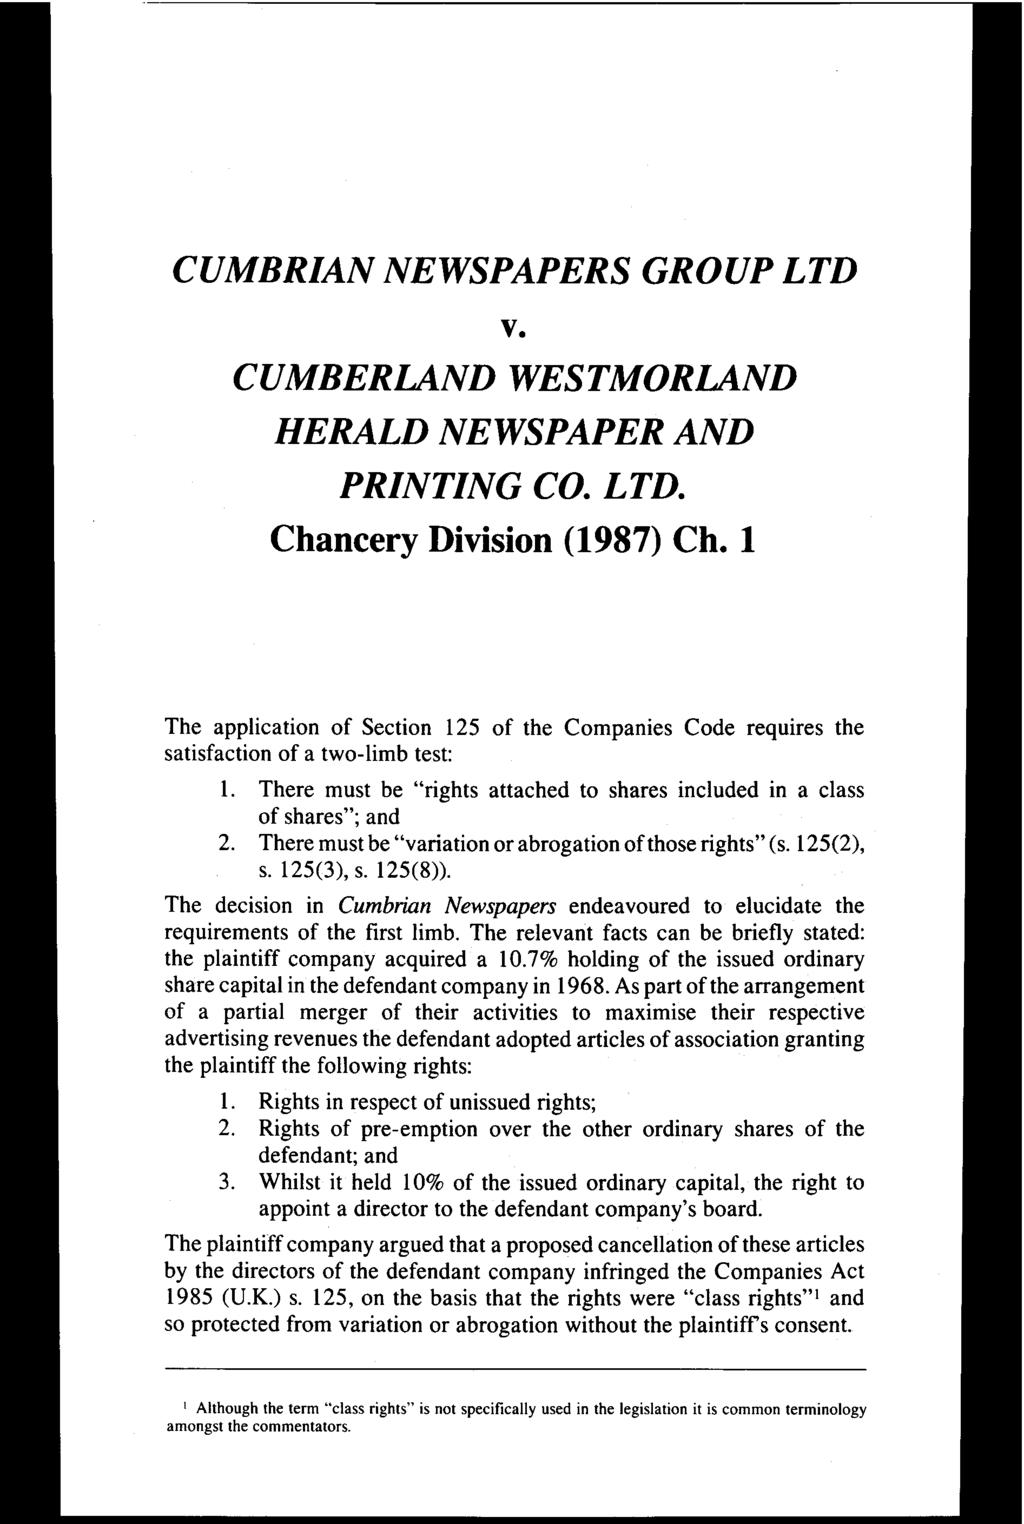 CUMBRZAN NEWSPAPERS GROUP LTD v. CUMBERLAND WESTMORLAND HERALD NEWSPAPER AND PRINTING CO. LTD. Chancery Division (1987) Ch.